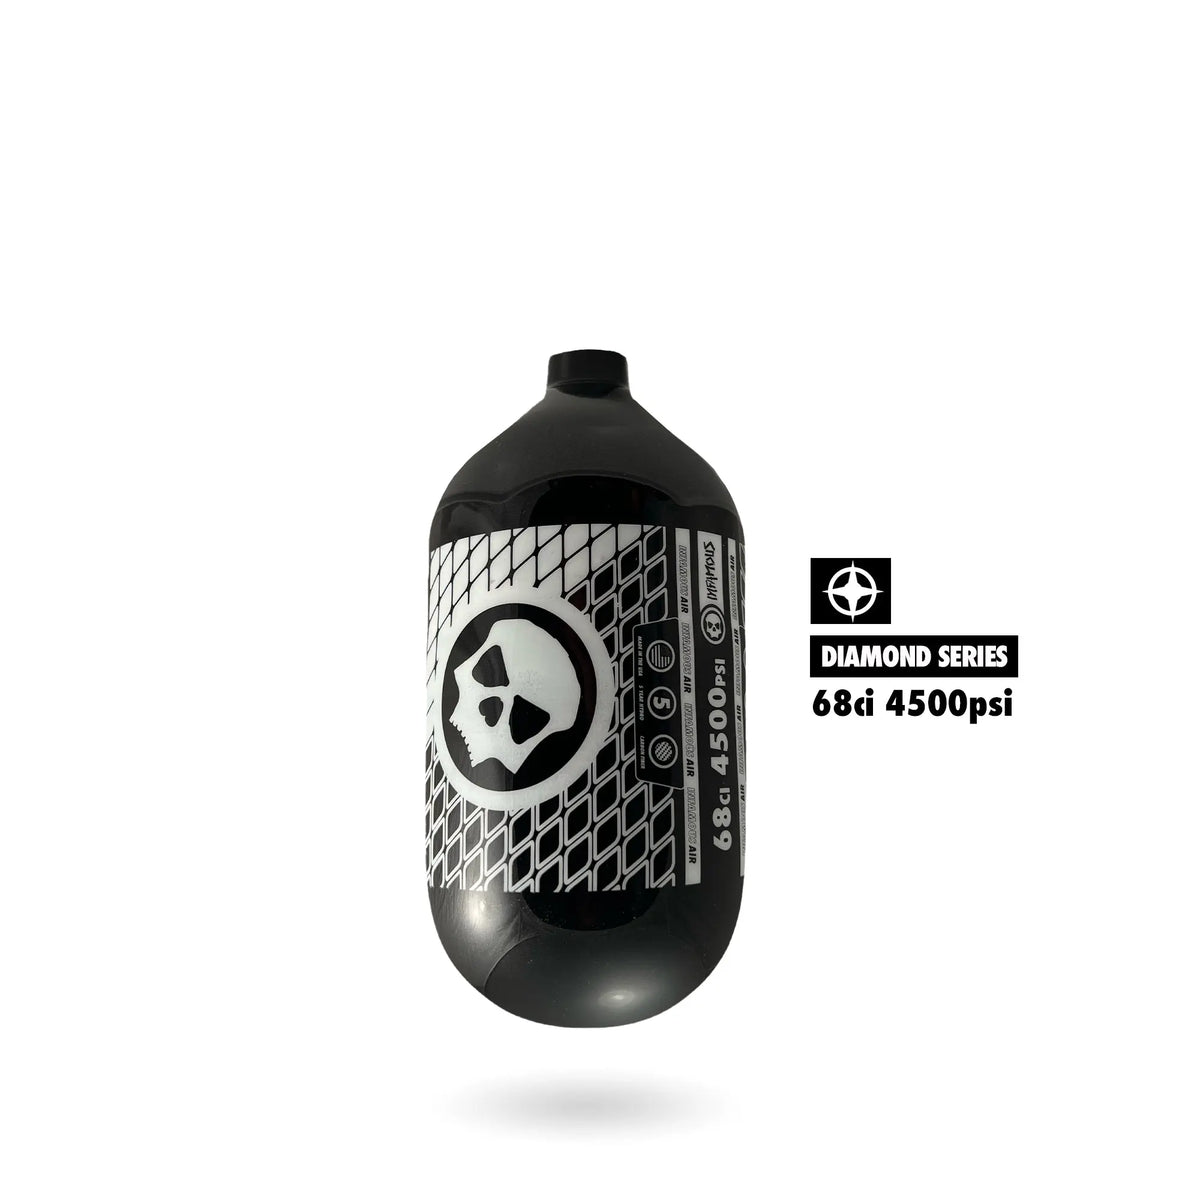 &quot;DIAMOND SERIES&quot; AIR PATTERN AIR TANK - 68ci / 4500psi (BOTTLE ONLY) Infamous Paintball